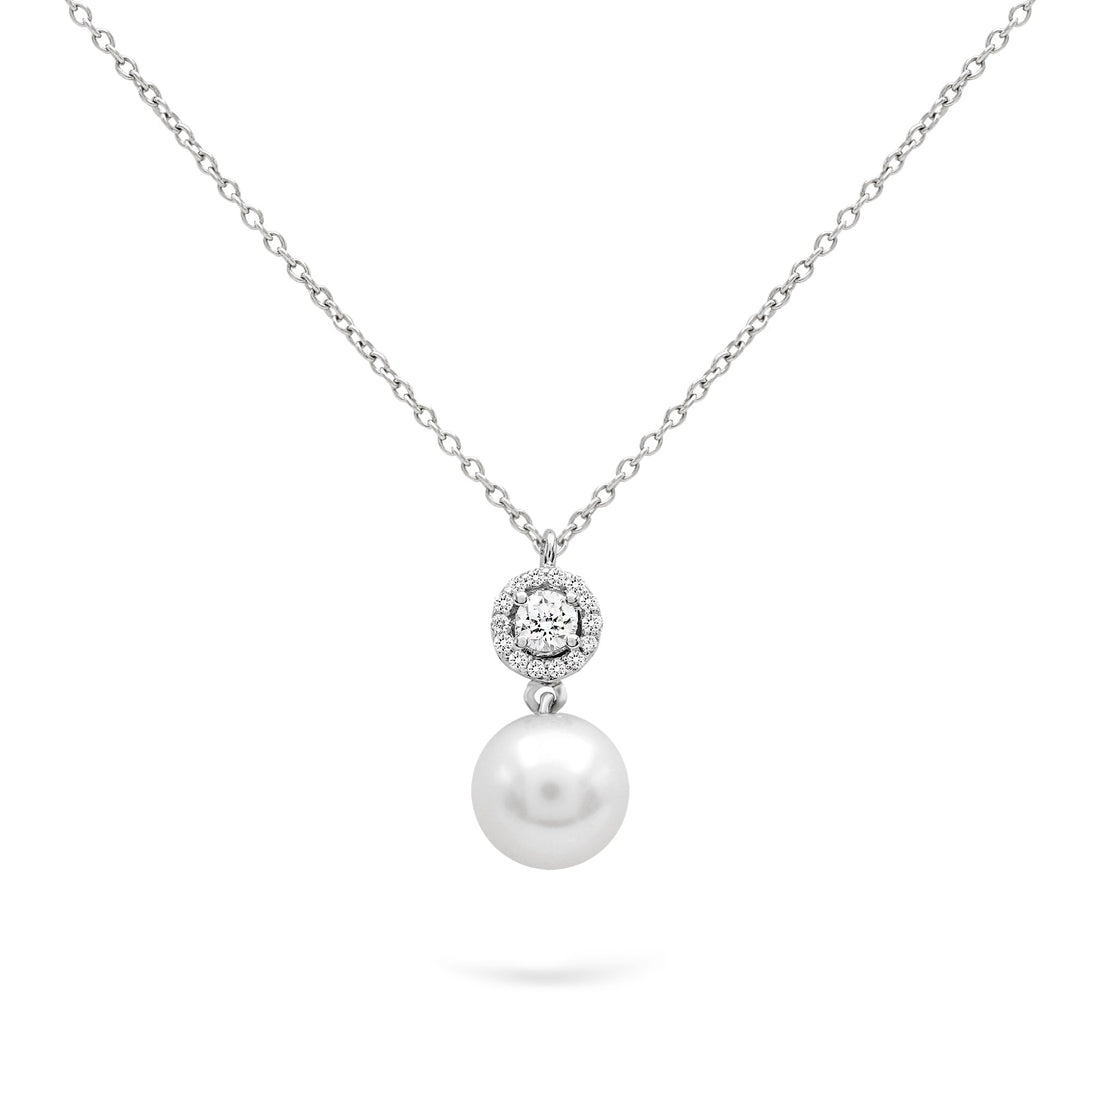 Jewelry Pearls | Diamond Pendant | 0.19 Cts. | 14K Gold - White / 40 - 43 Cm / necklace Zengoda Shop online from